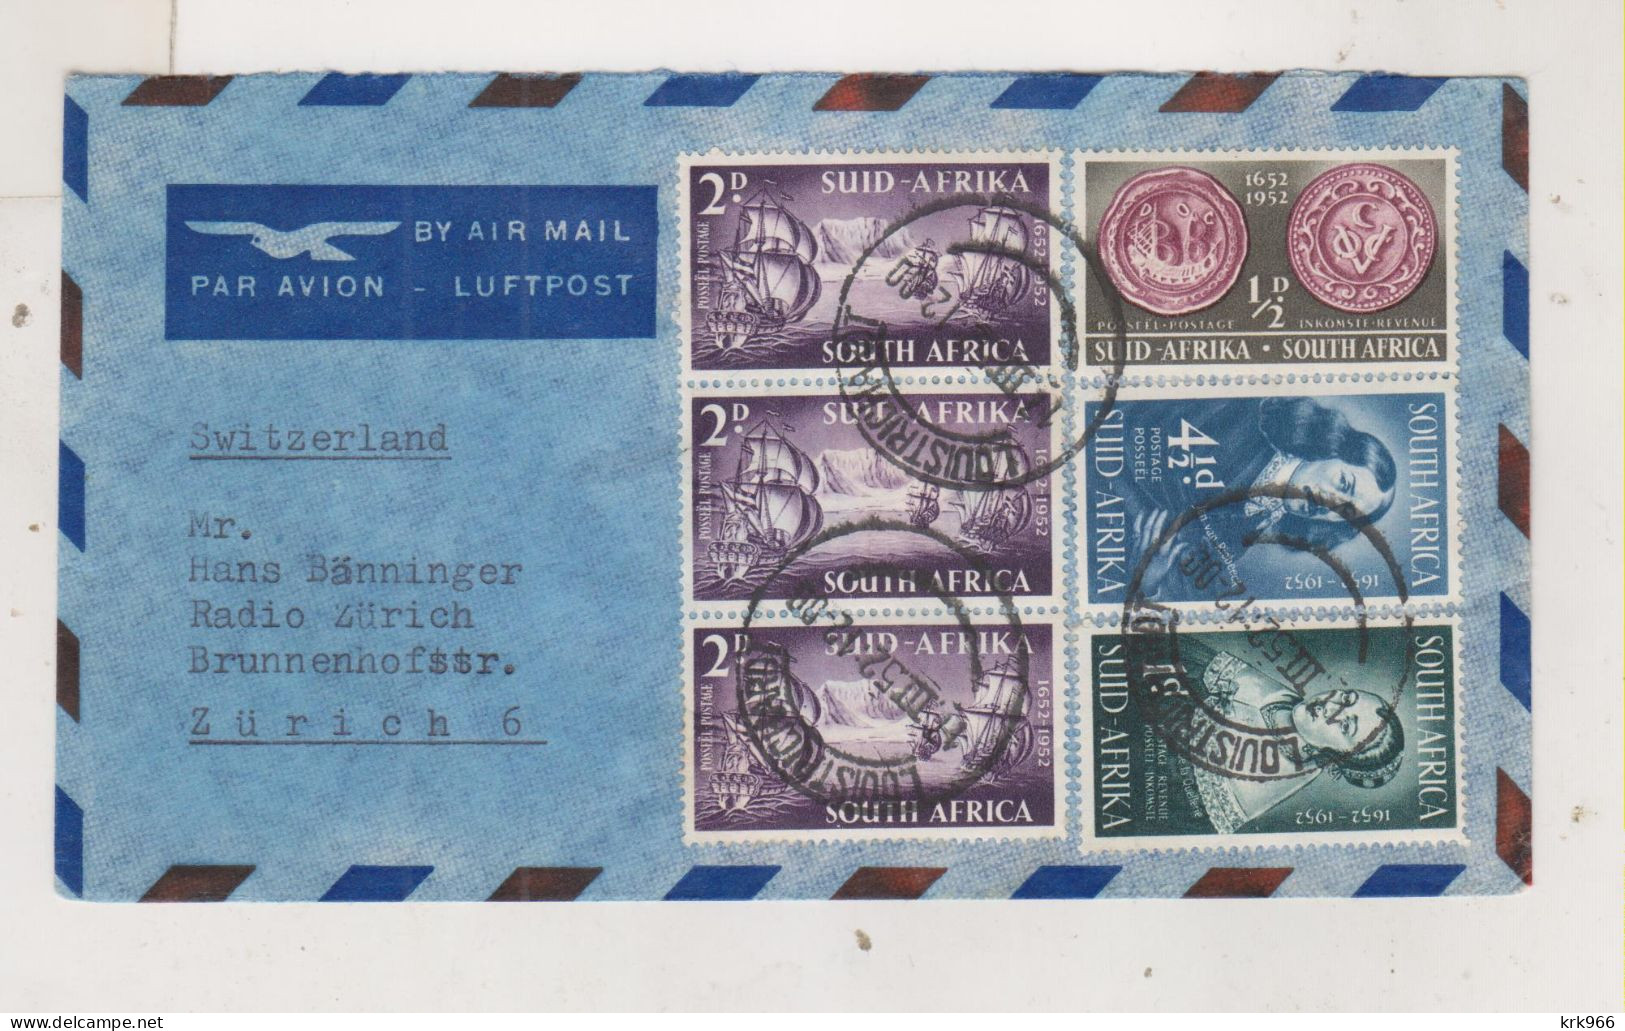 SOUTH AFRICA 1952 LOUIS TRIHARDT Nice Airmail Cover To Switzerland - Airmail